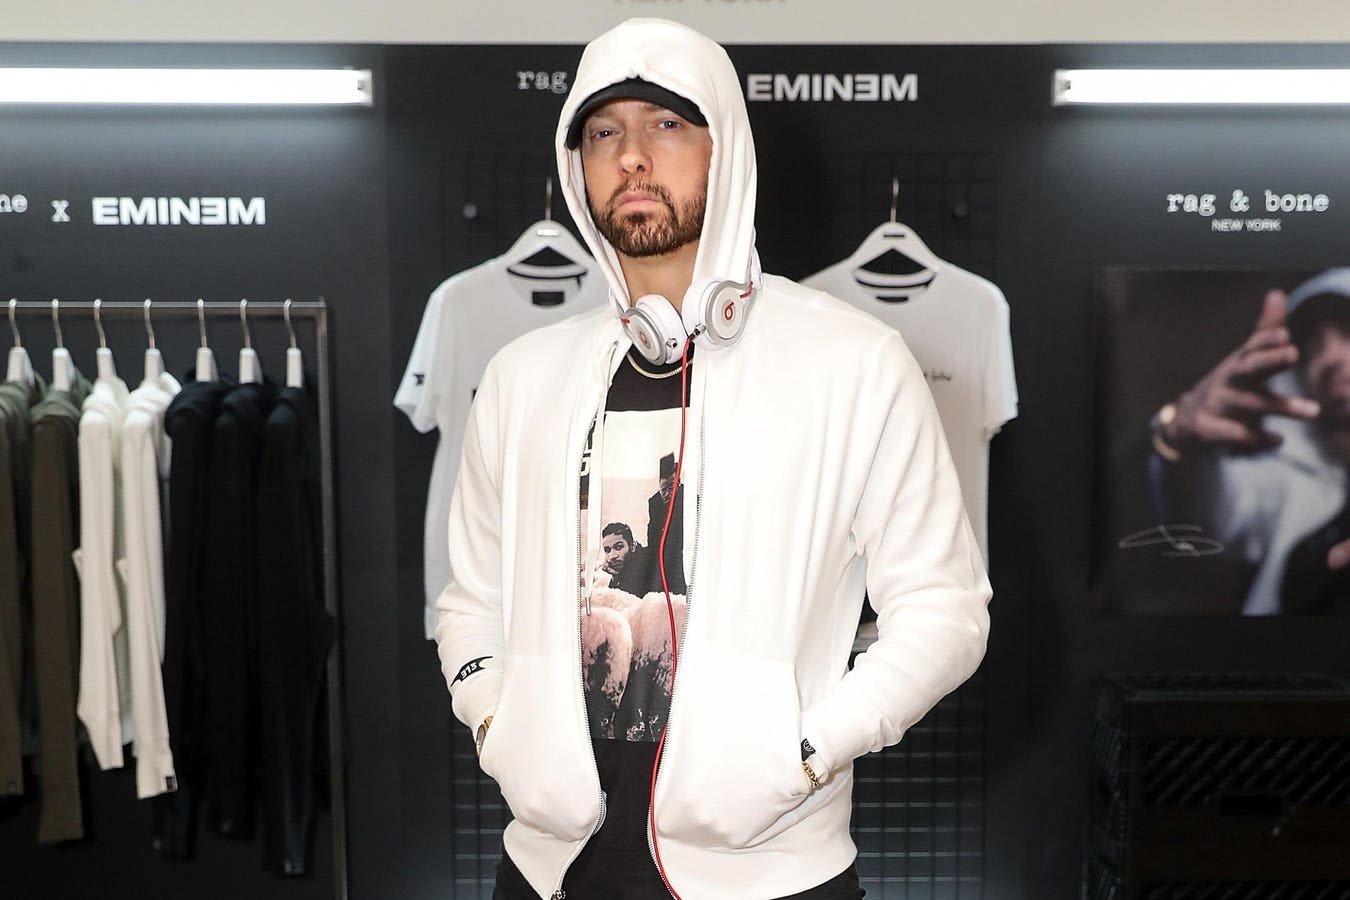 Eminem Charts A ‘Brand New’ Top 40 Hit–And This One Is Special